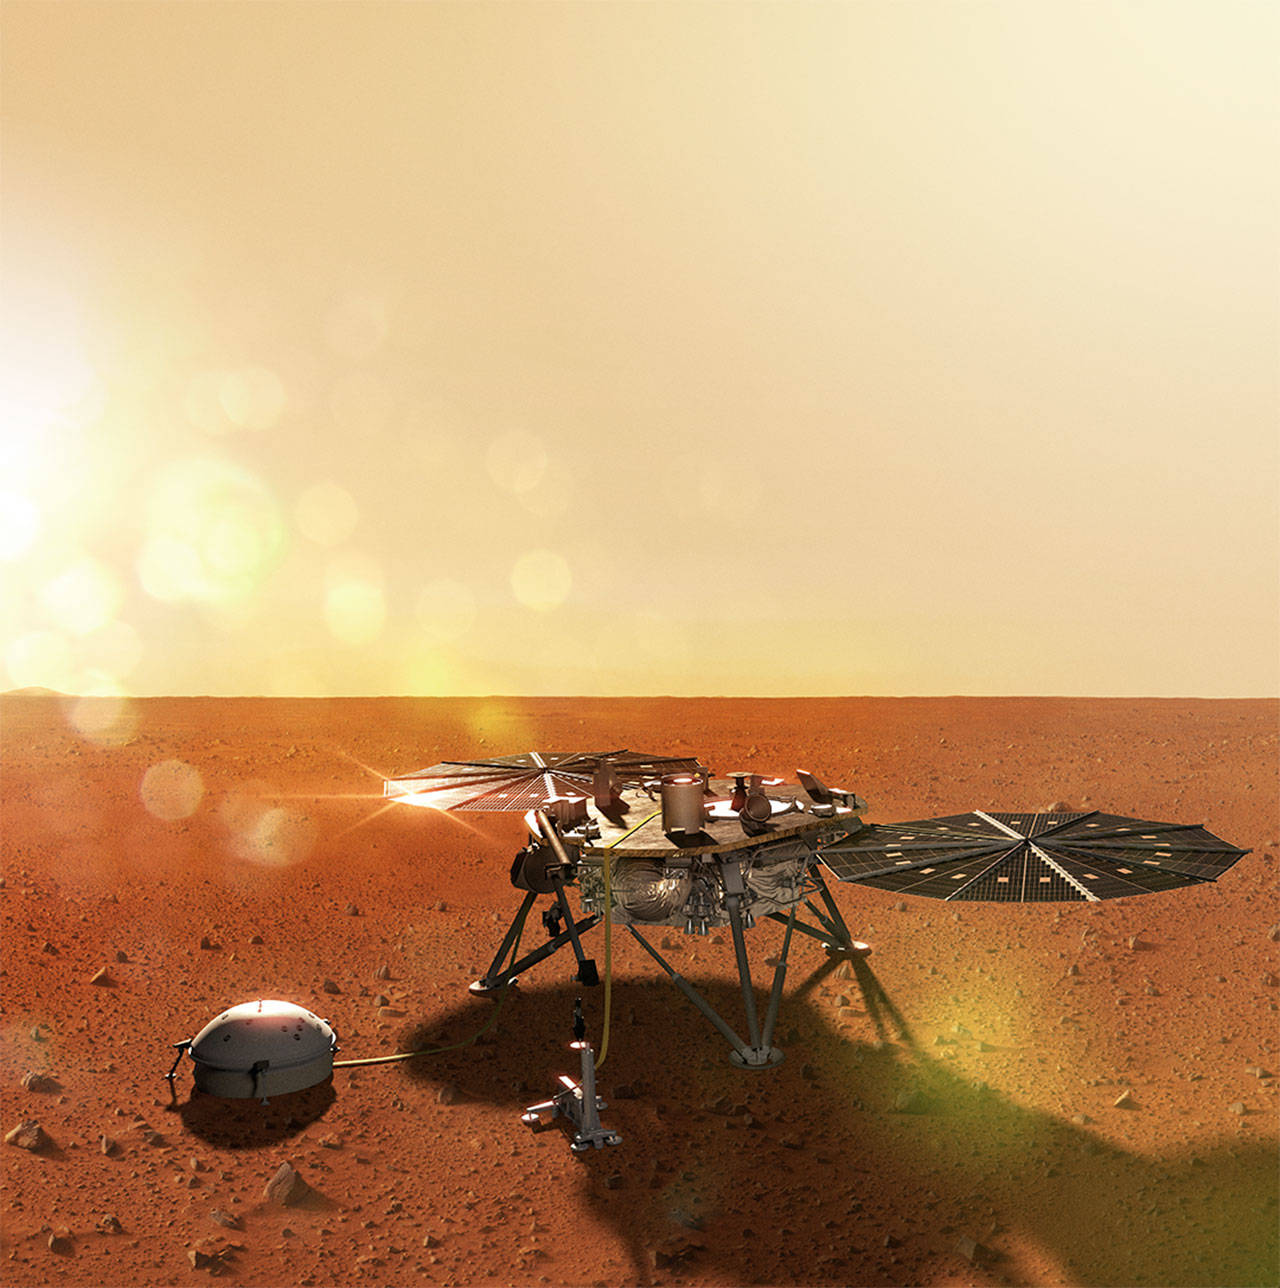 An artists rendering of the InSight Mars lander which touched down on the red planet on Nov. 26. Aerojet Rocketdyne designed thrusters which were used to let the craft safely land. Graphic courtesy of Aerojet Rocketdyne